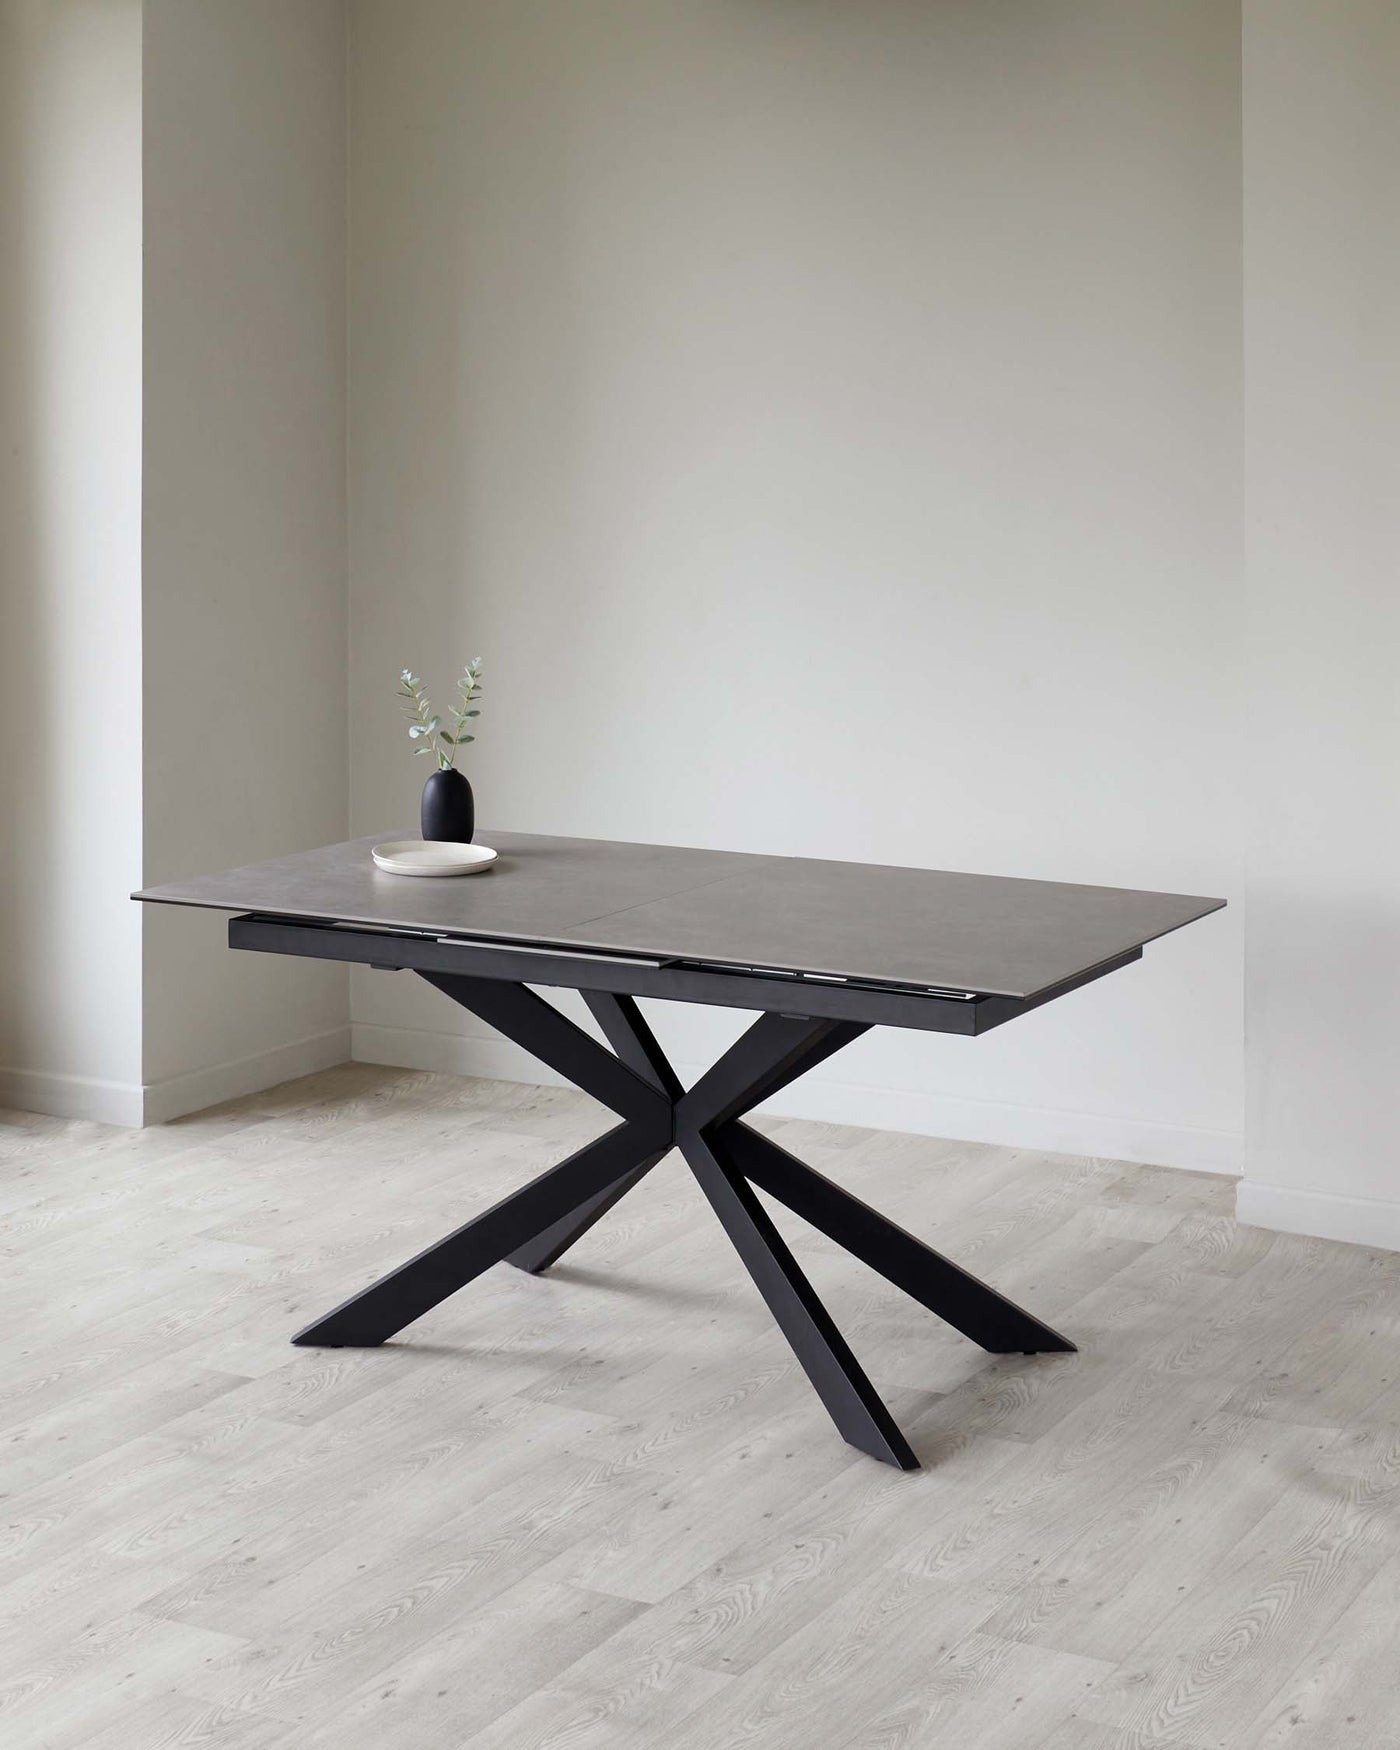 Modern minimalist rectangular dining table with a matte black tabletop and a sculptural black metal base, displayed in a room with light grey walls and pale wooden flooring. A small black vase with a sprig of greenery is placed on the table.